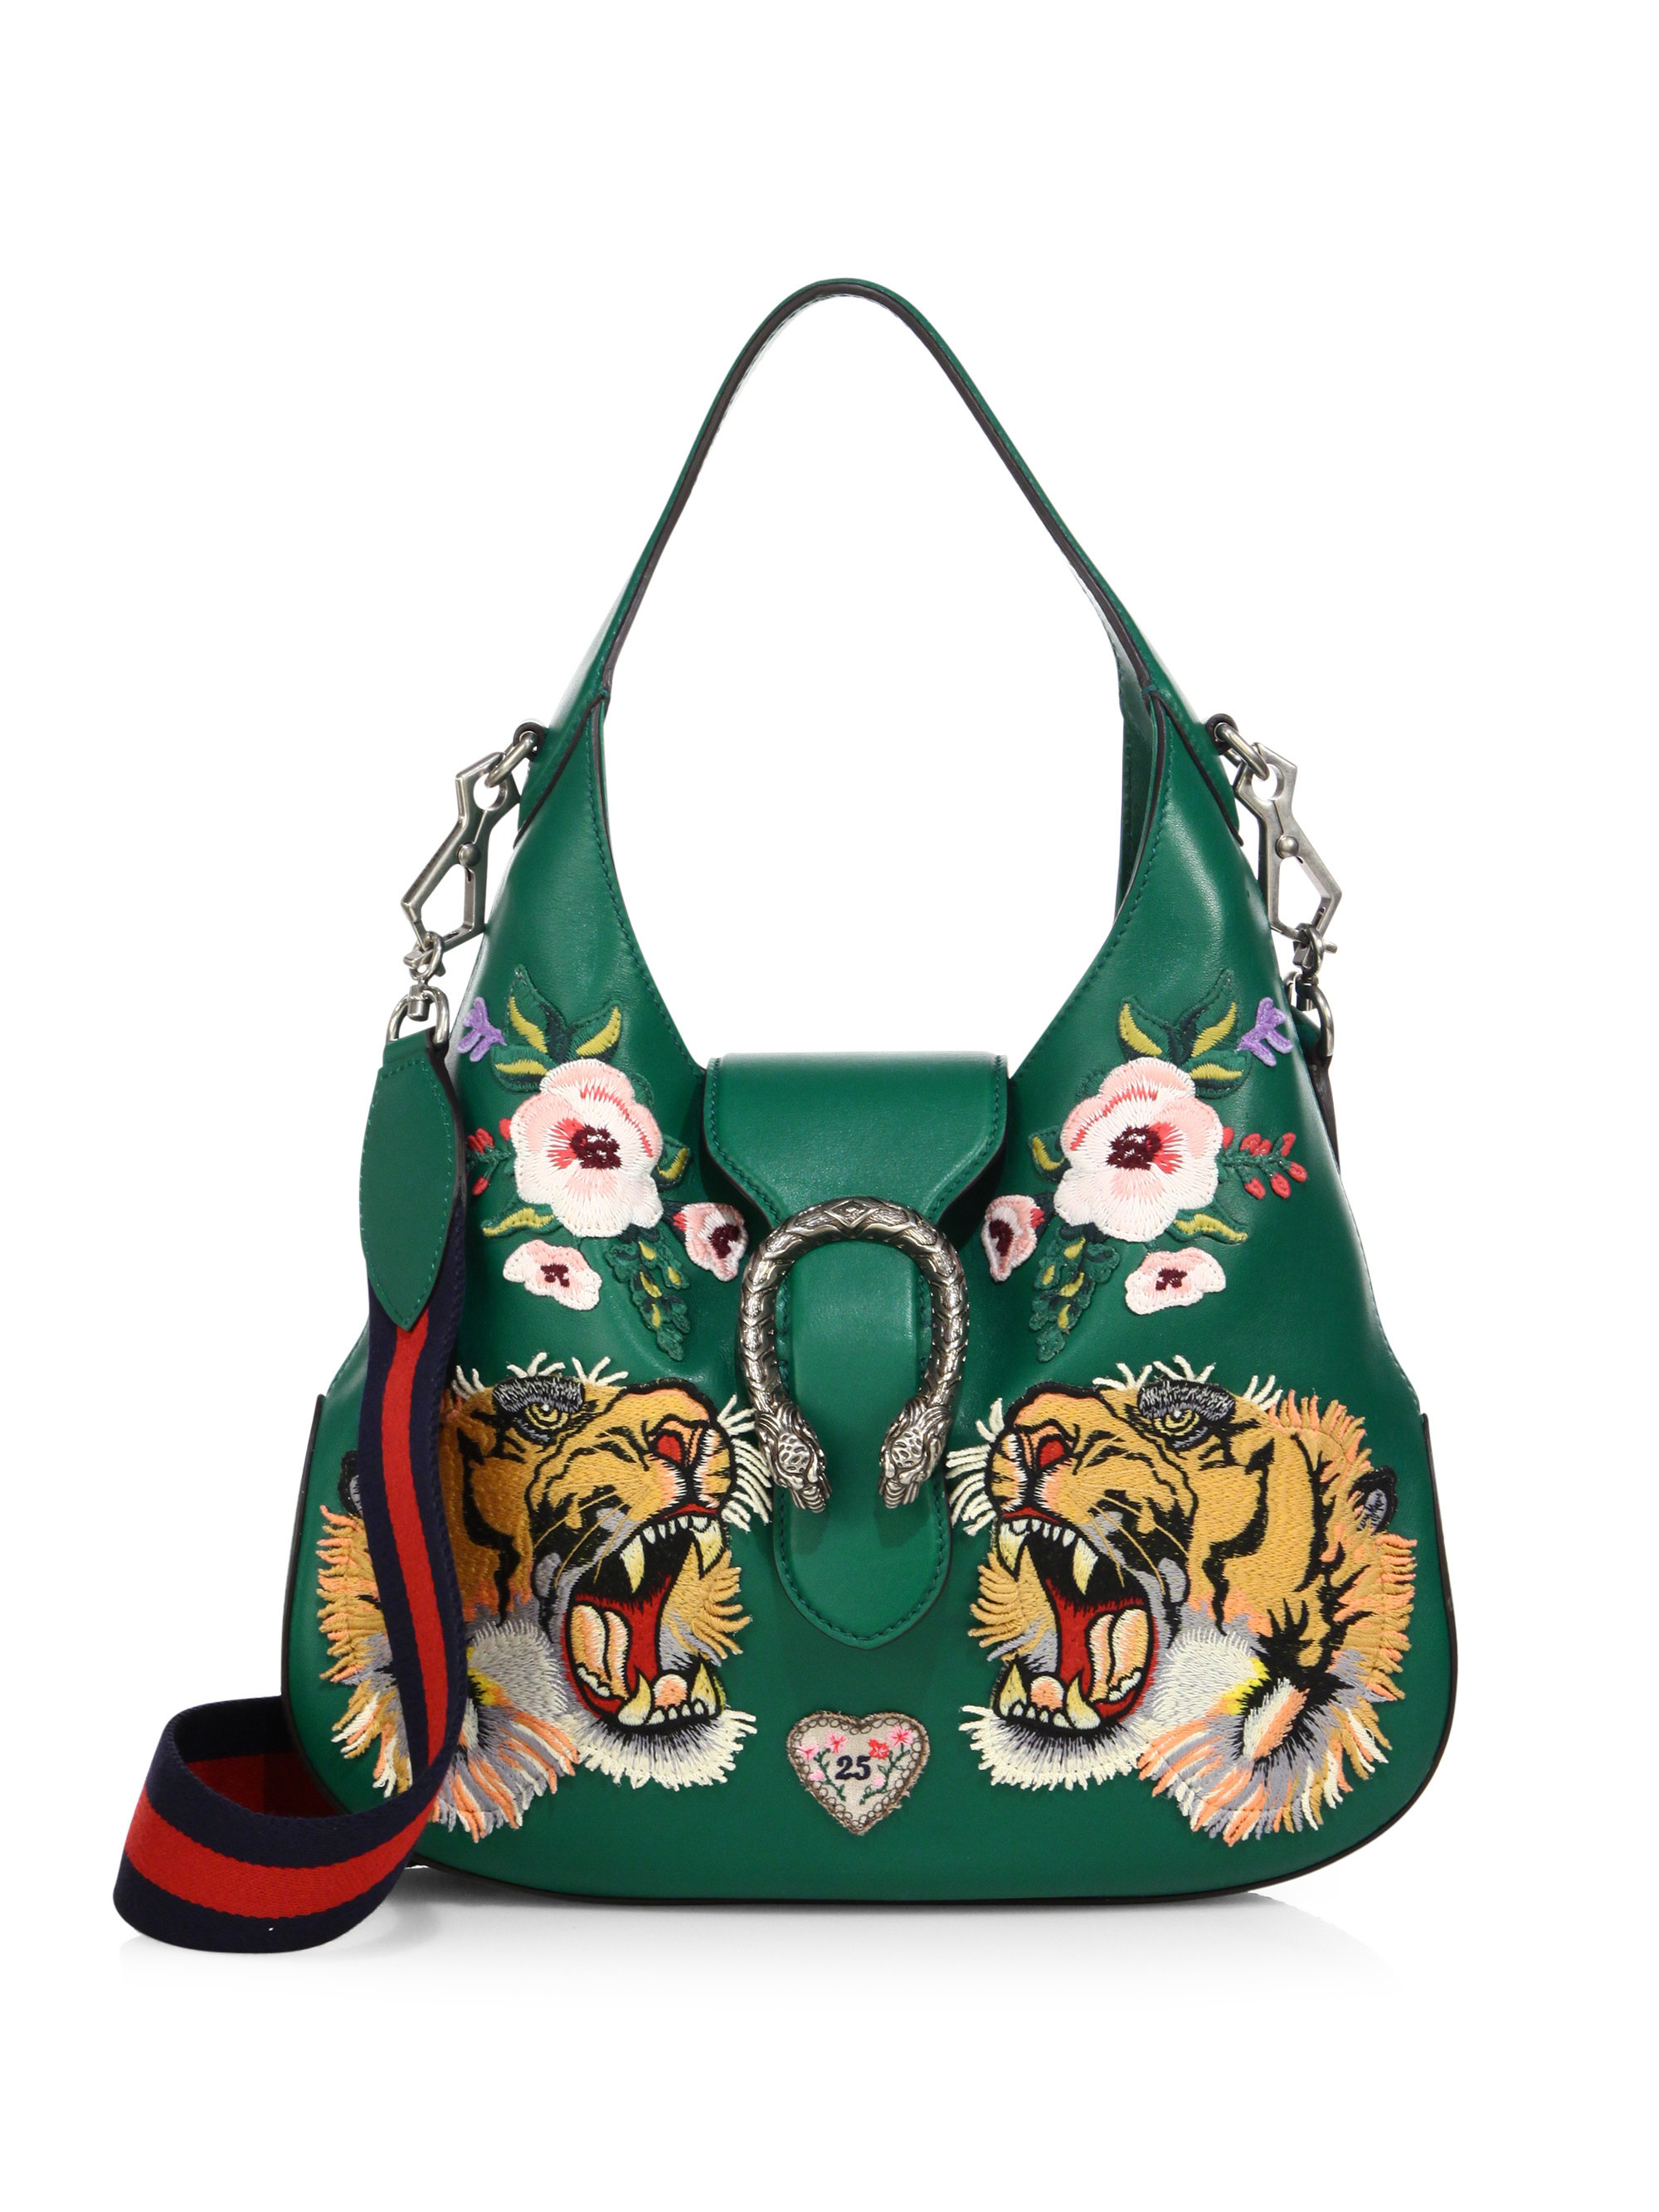 Gucci Dionysus Small Embroidered Leather Hobo Bag in Green - Save 27% | Lyst